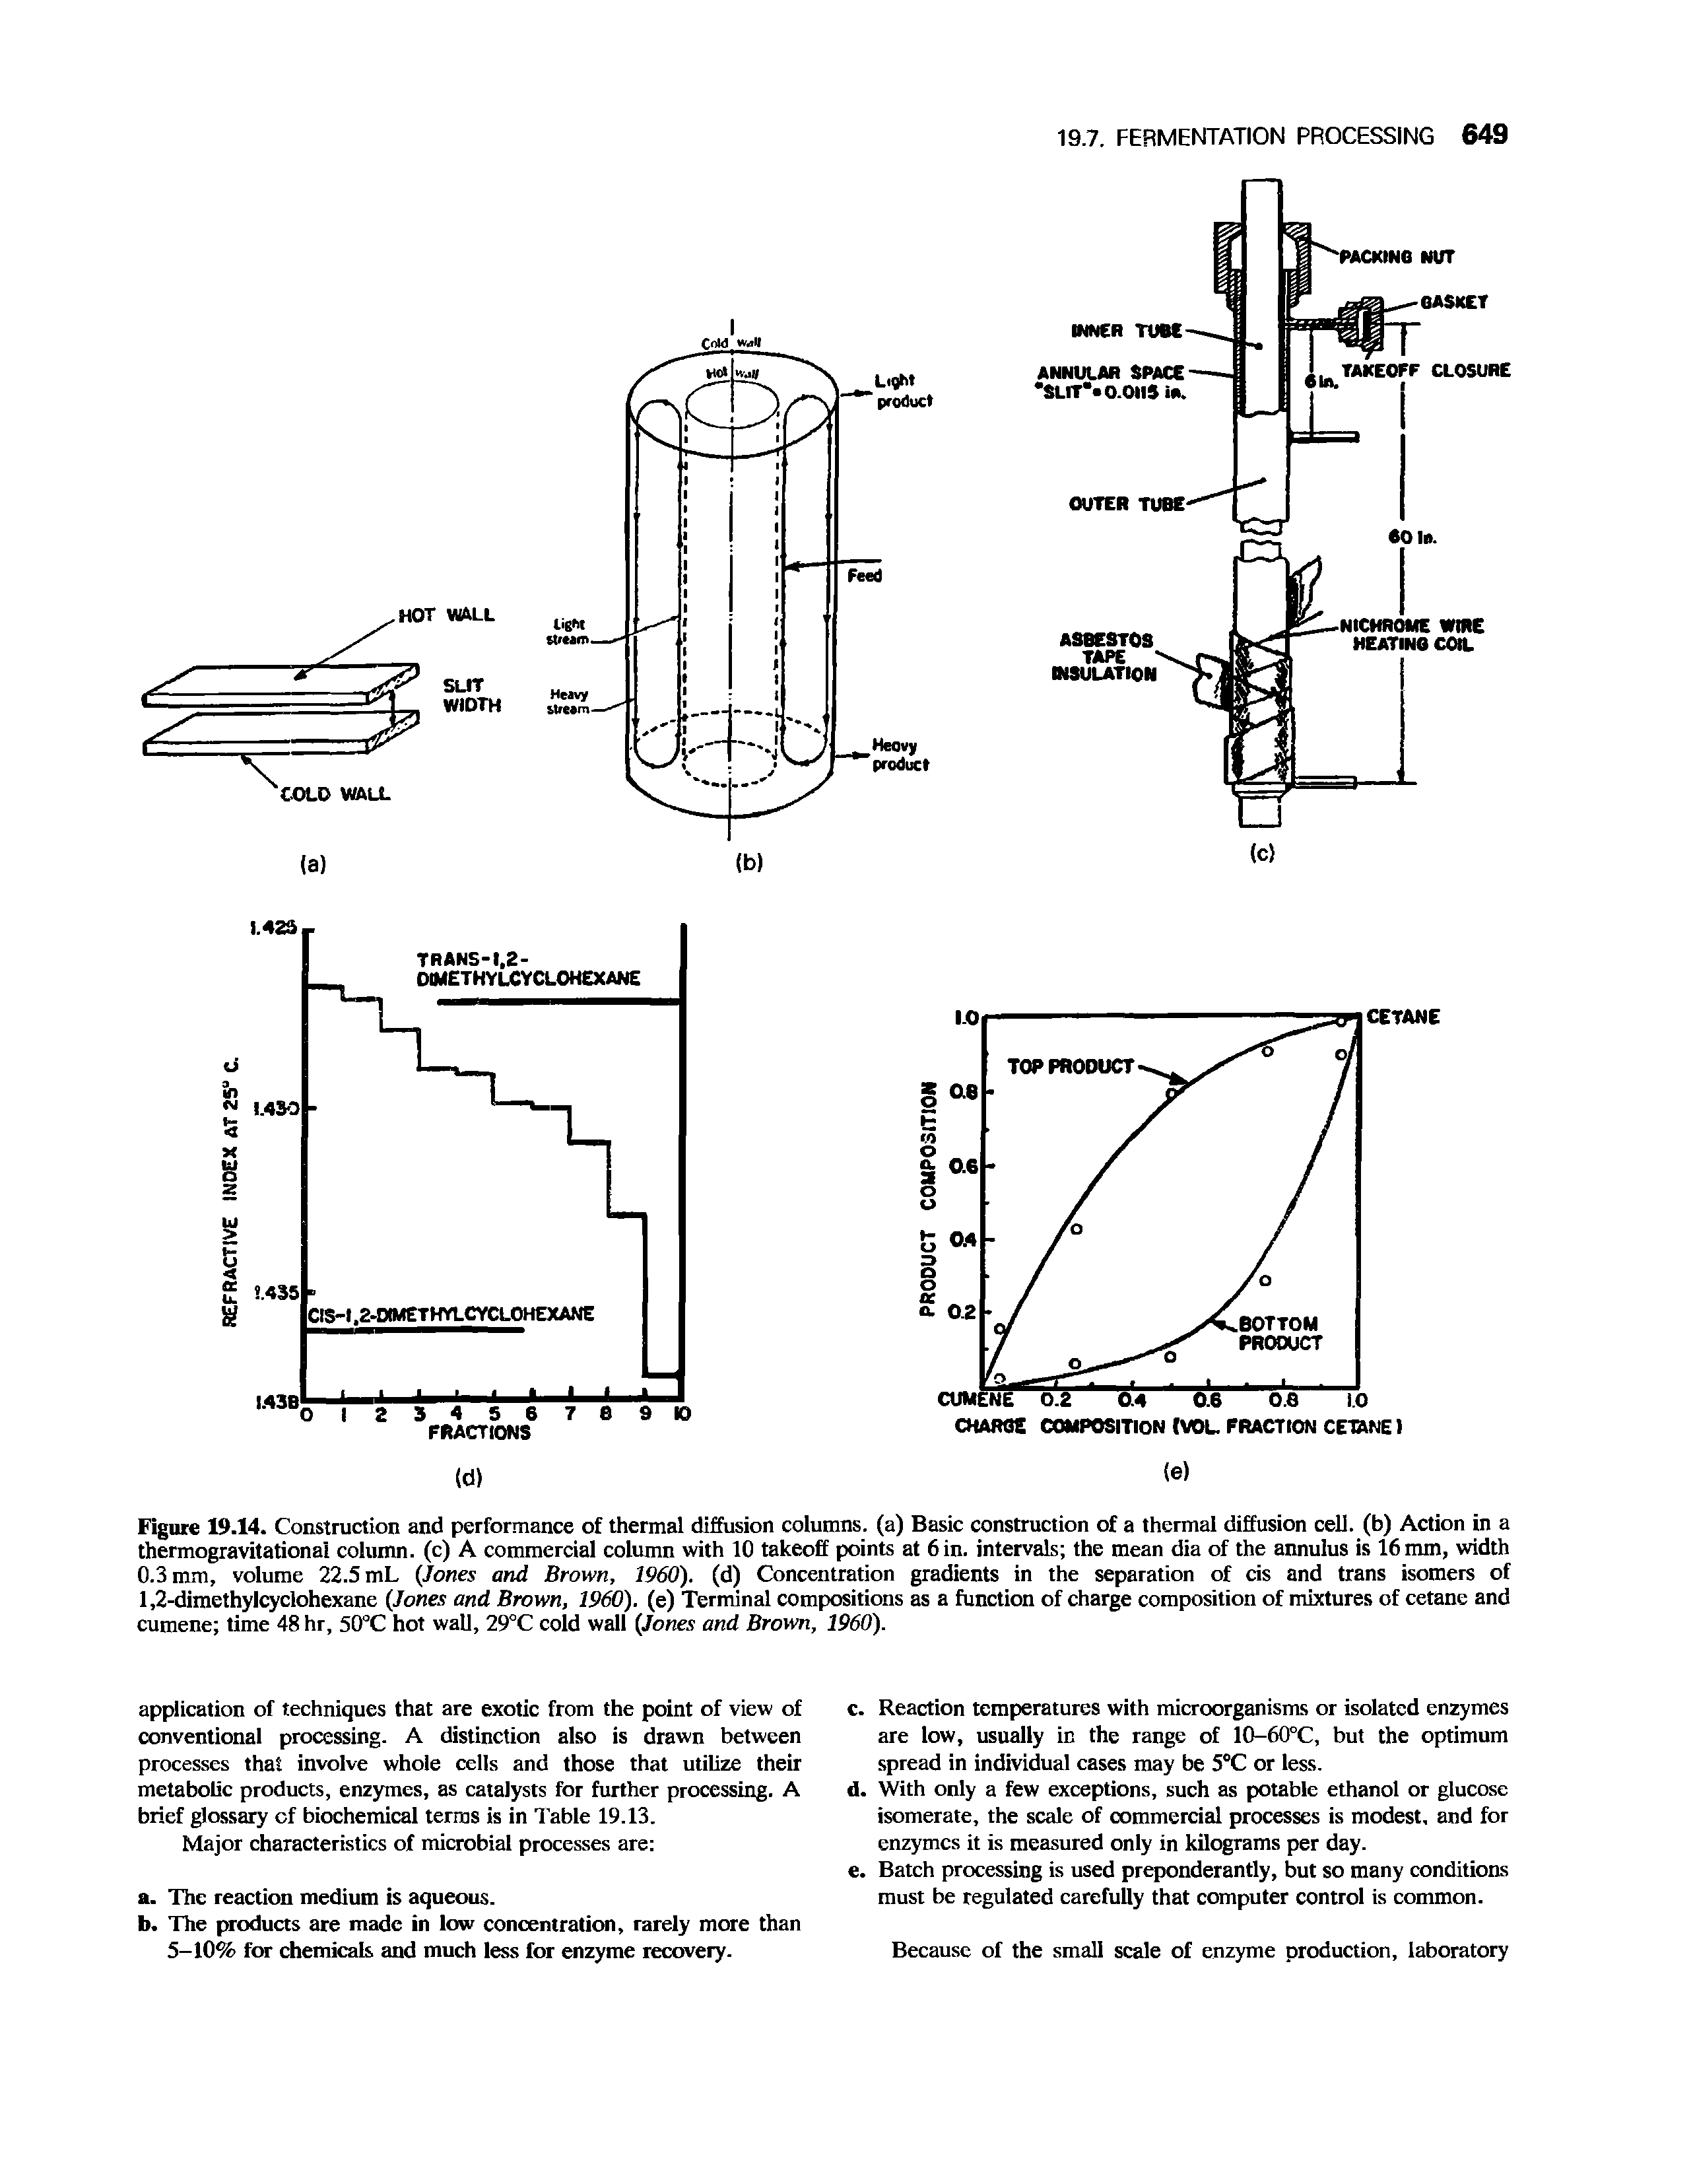 Figure 19.14. Construction and performance of thermal diffusion columns, (a) Basic construction of a thermal diffusion cell, (b) Action in a thermogravitationai column, (c) A commercial column with 10 takeoff points at 6 in. intervals the mean dia of the annulus is 16 mm, width 0.3 mm, volume 22.5 mL (Jones and Brown, 1960). (d) Concentration gradients in the separation of cis and trans isomers of 1,2-dimethylcyclohexane (Jones and Brown, 1960). (e) Terminal compositions as a function of charge composition of mixtures of cetane and cumene time 48 hr, 50°C hot wall, 29°C cold wall (Jones and Brown, 1960).